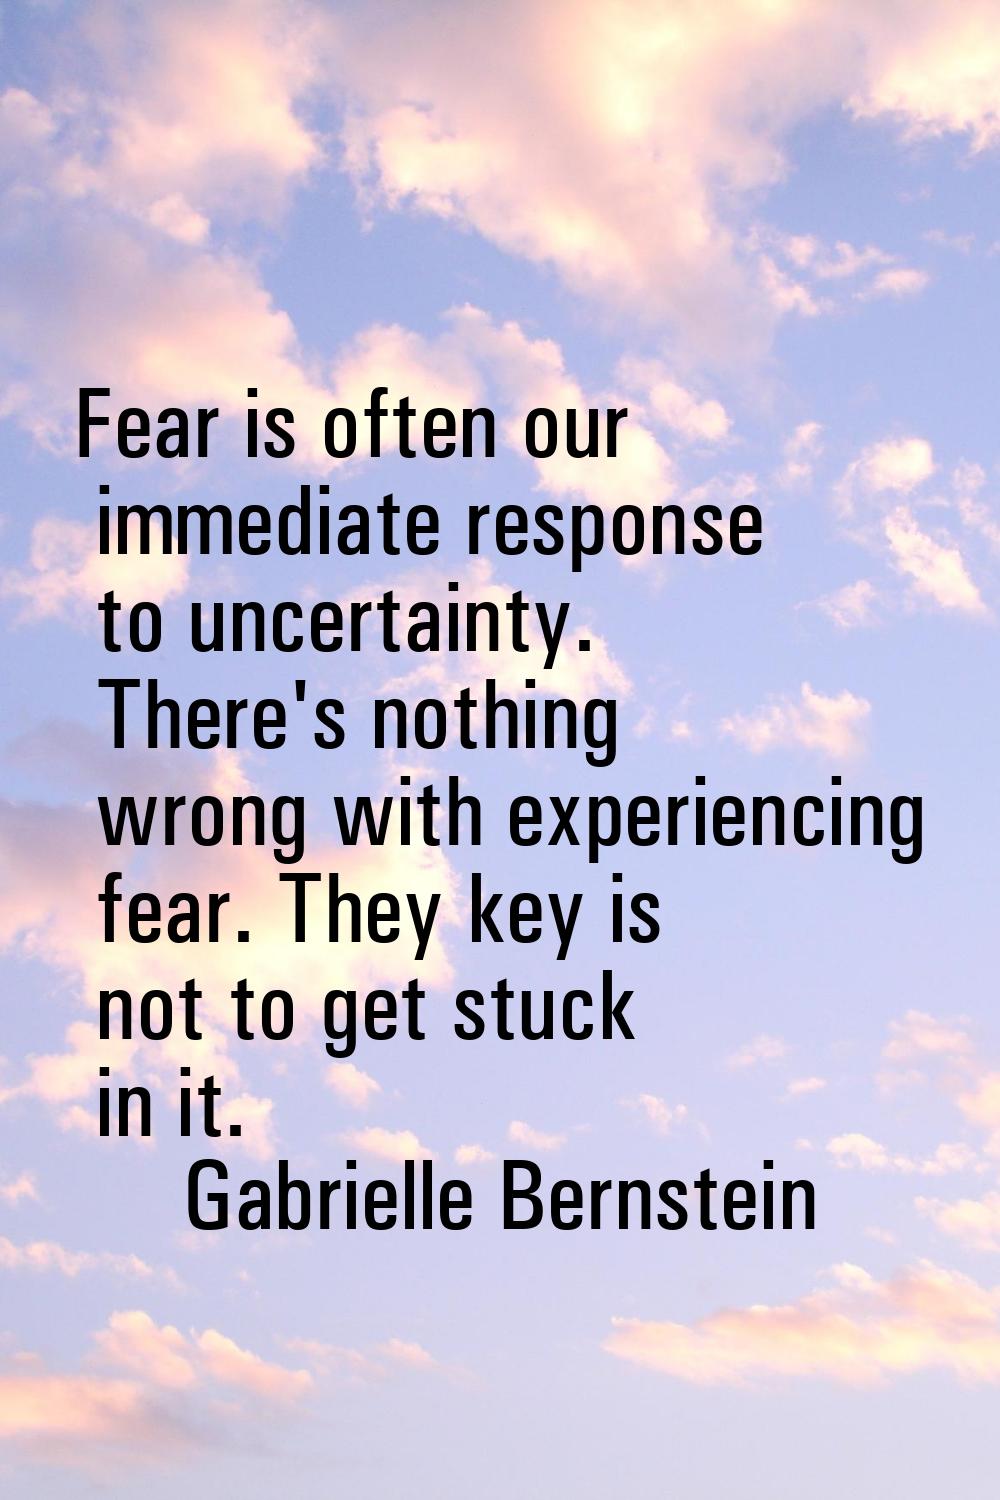 Fear is often our immediate response to uncertainty. There's nothing wrong with experiencing fear. 